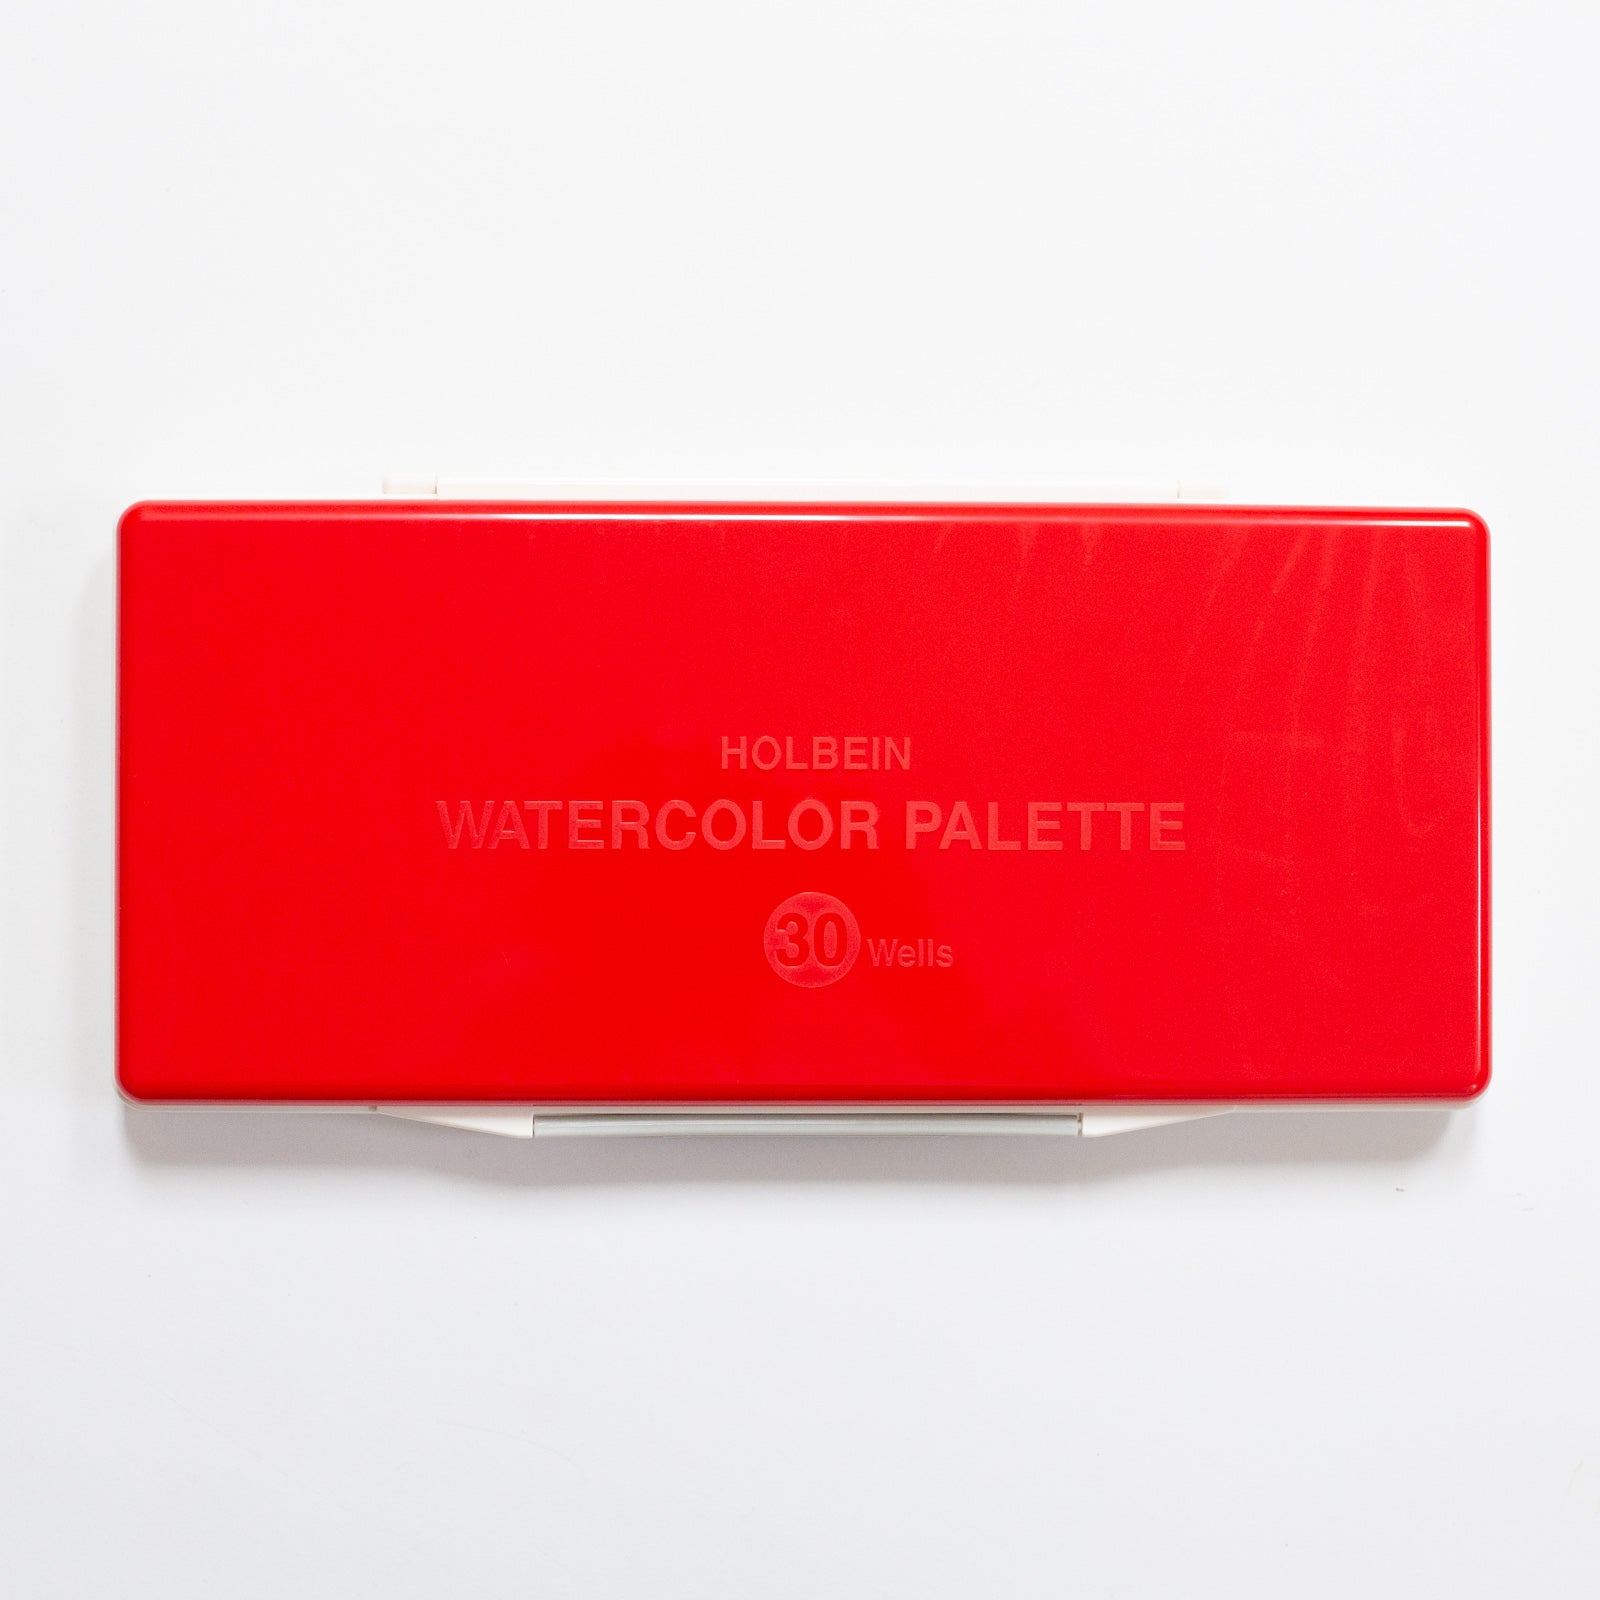 Holbein watercolor palette 30